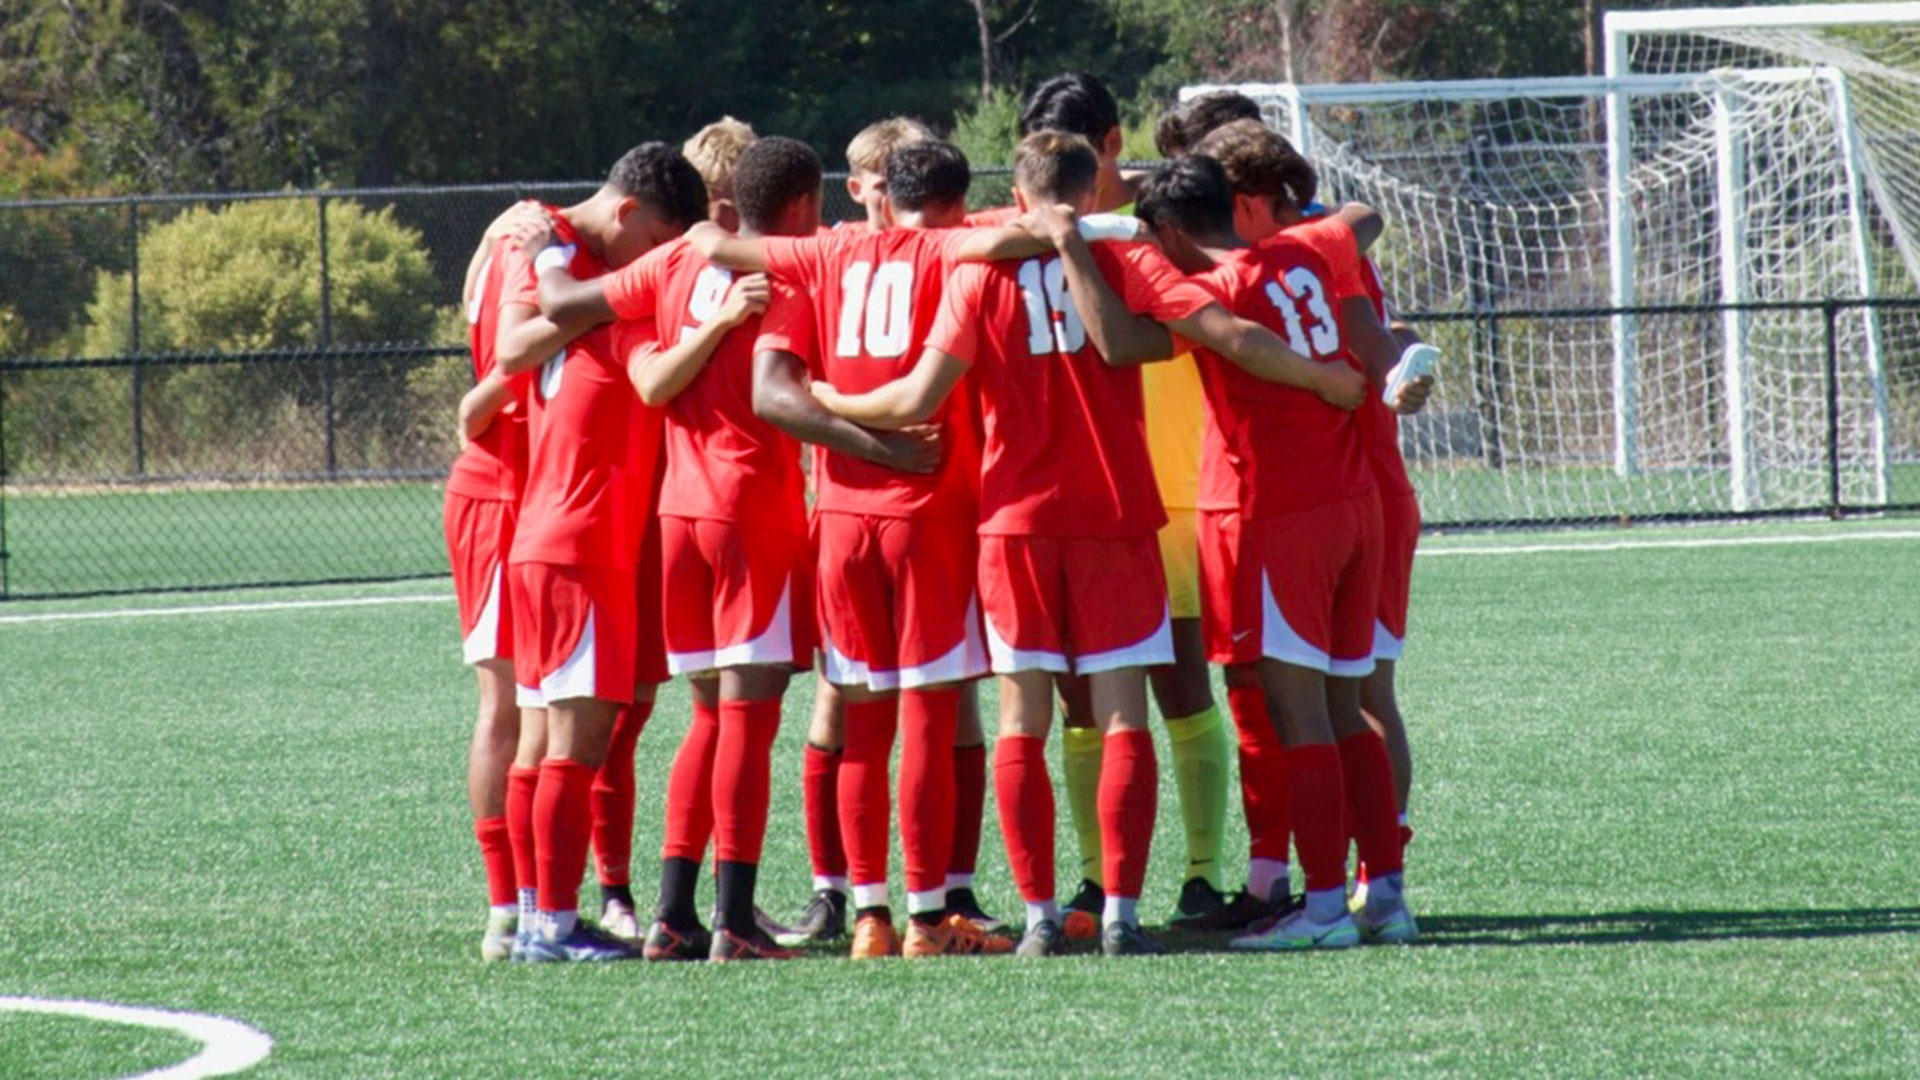 team in red jerseys in a huddle